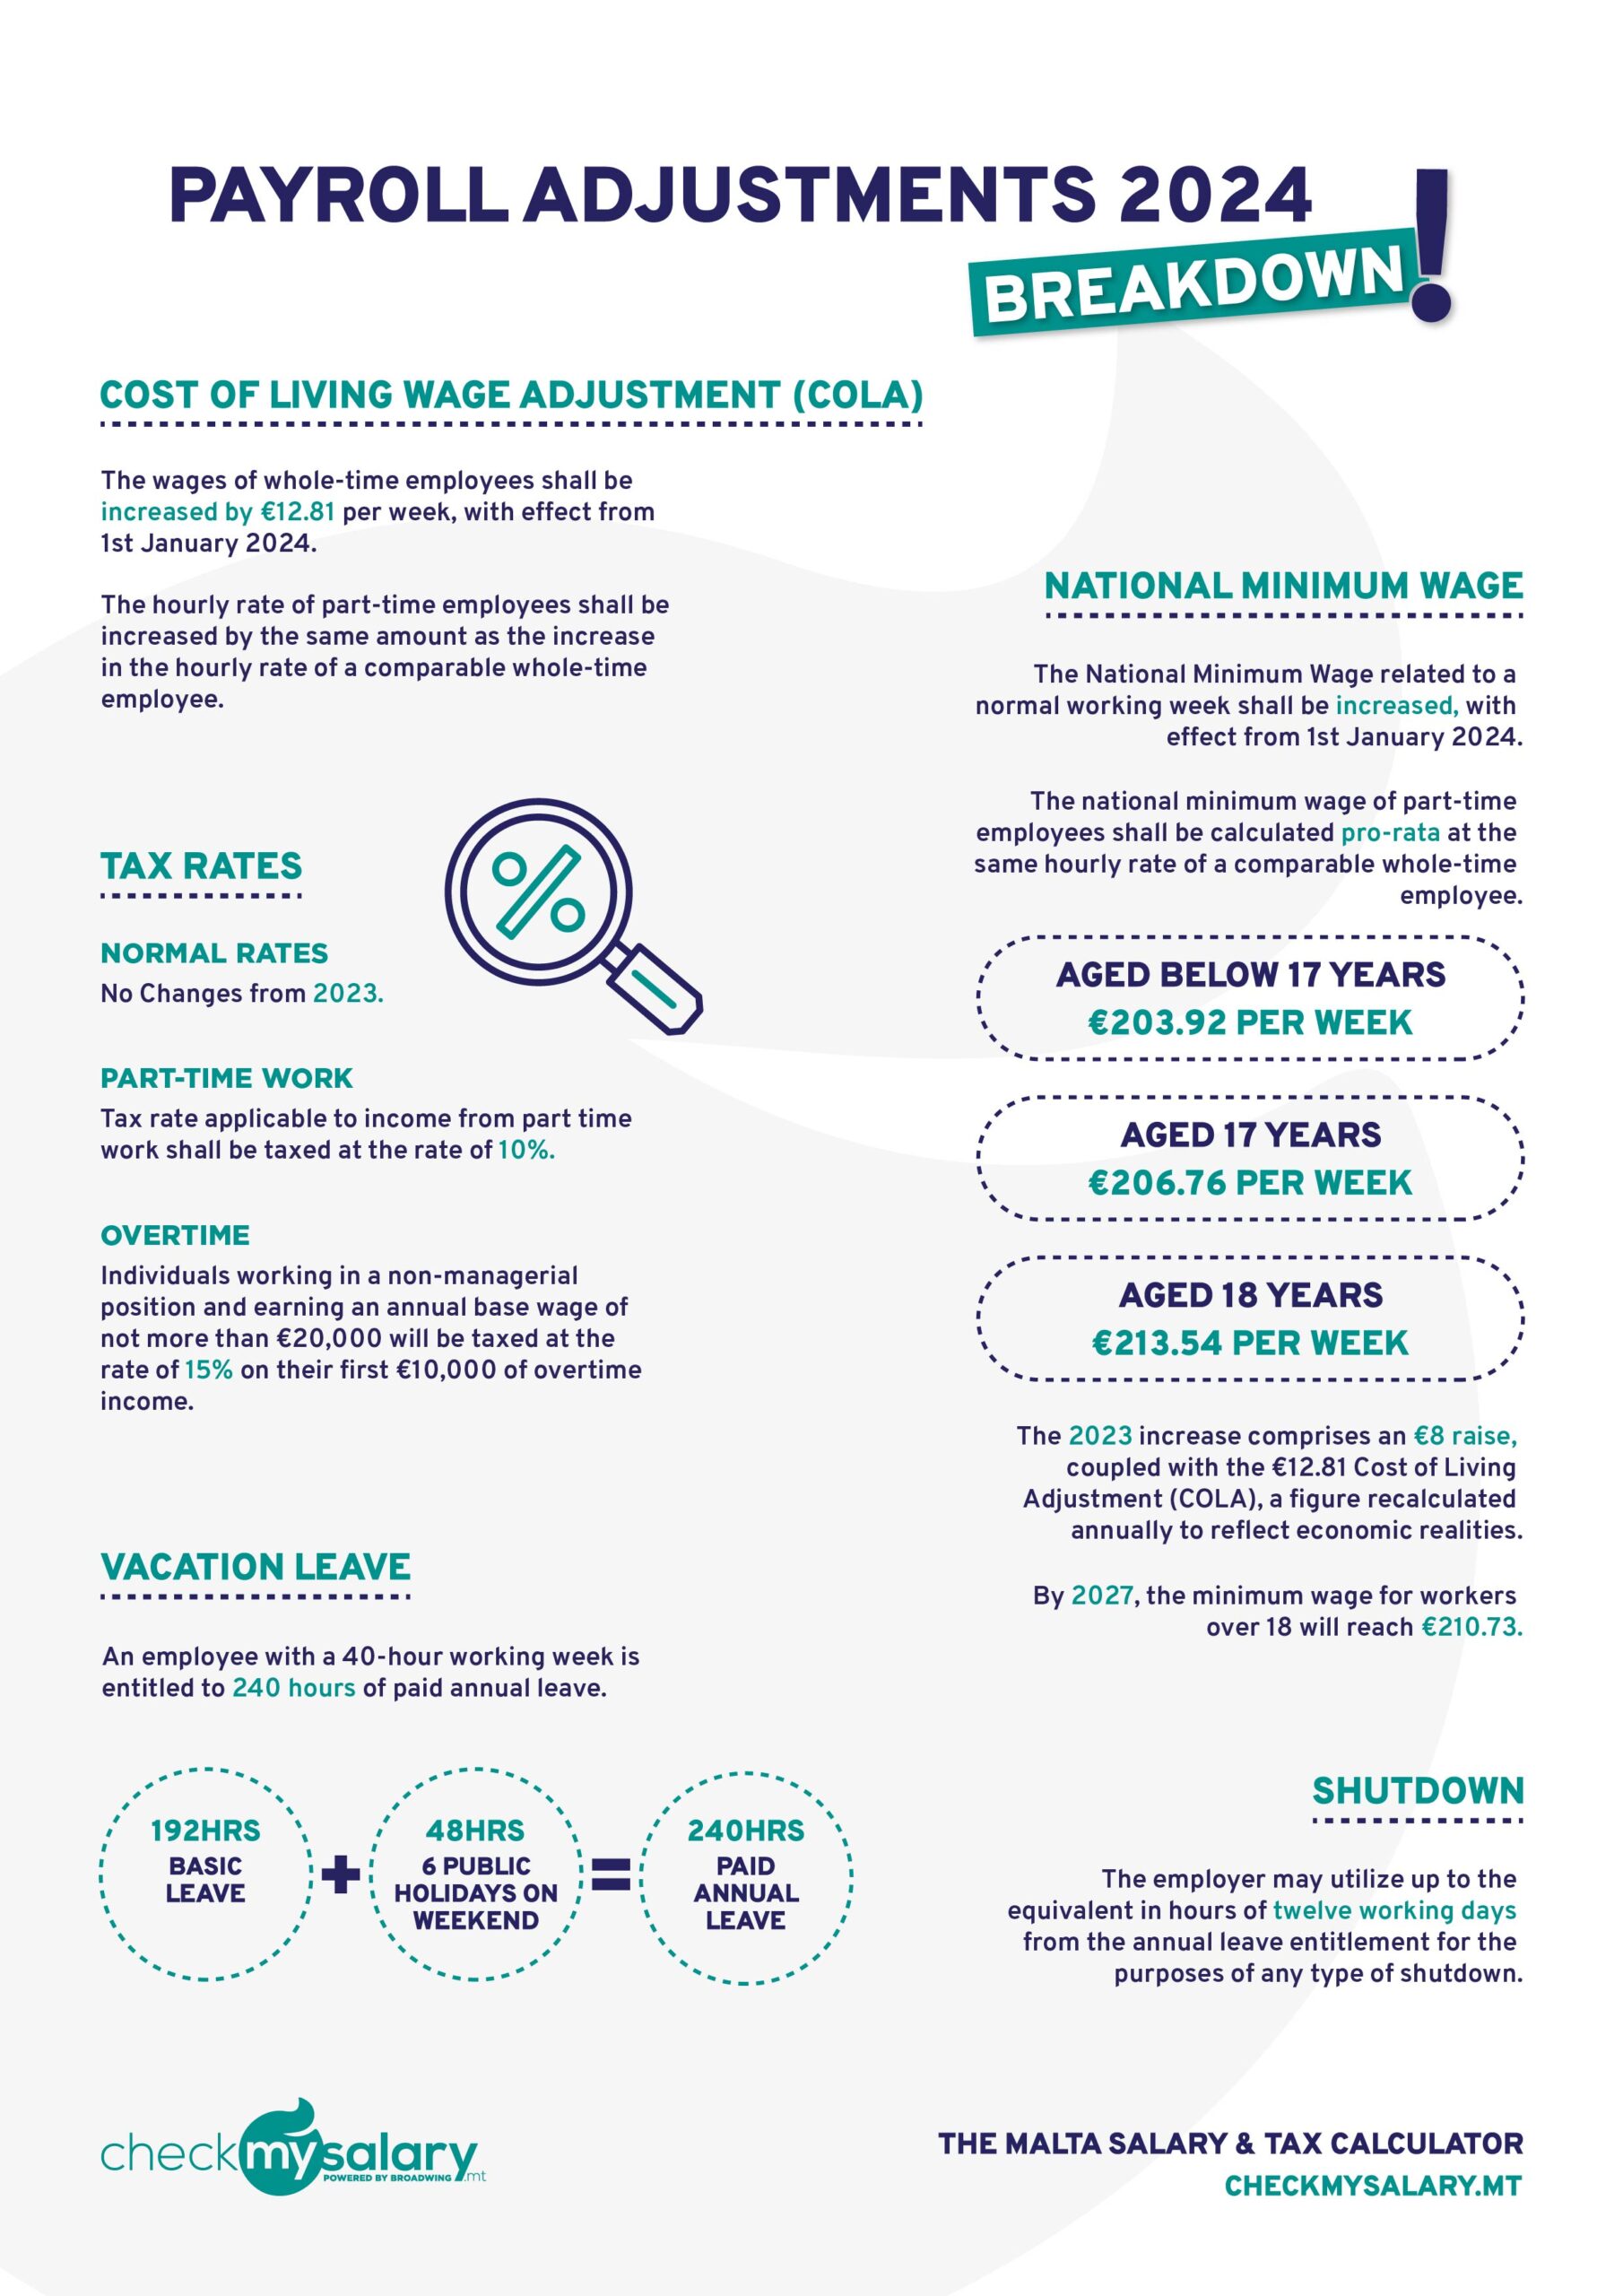 Malta Income Tax, Social Security and Payroll Adjustments Factsheet Infographic